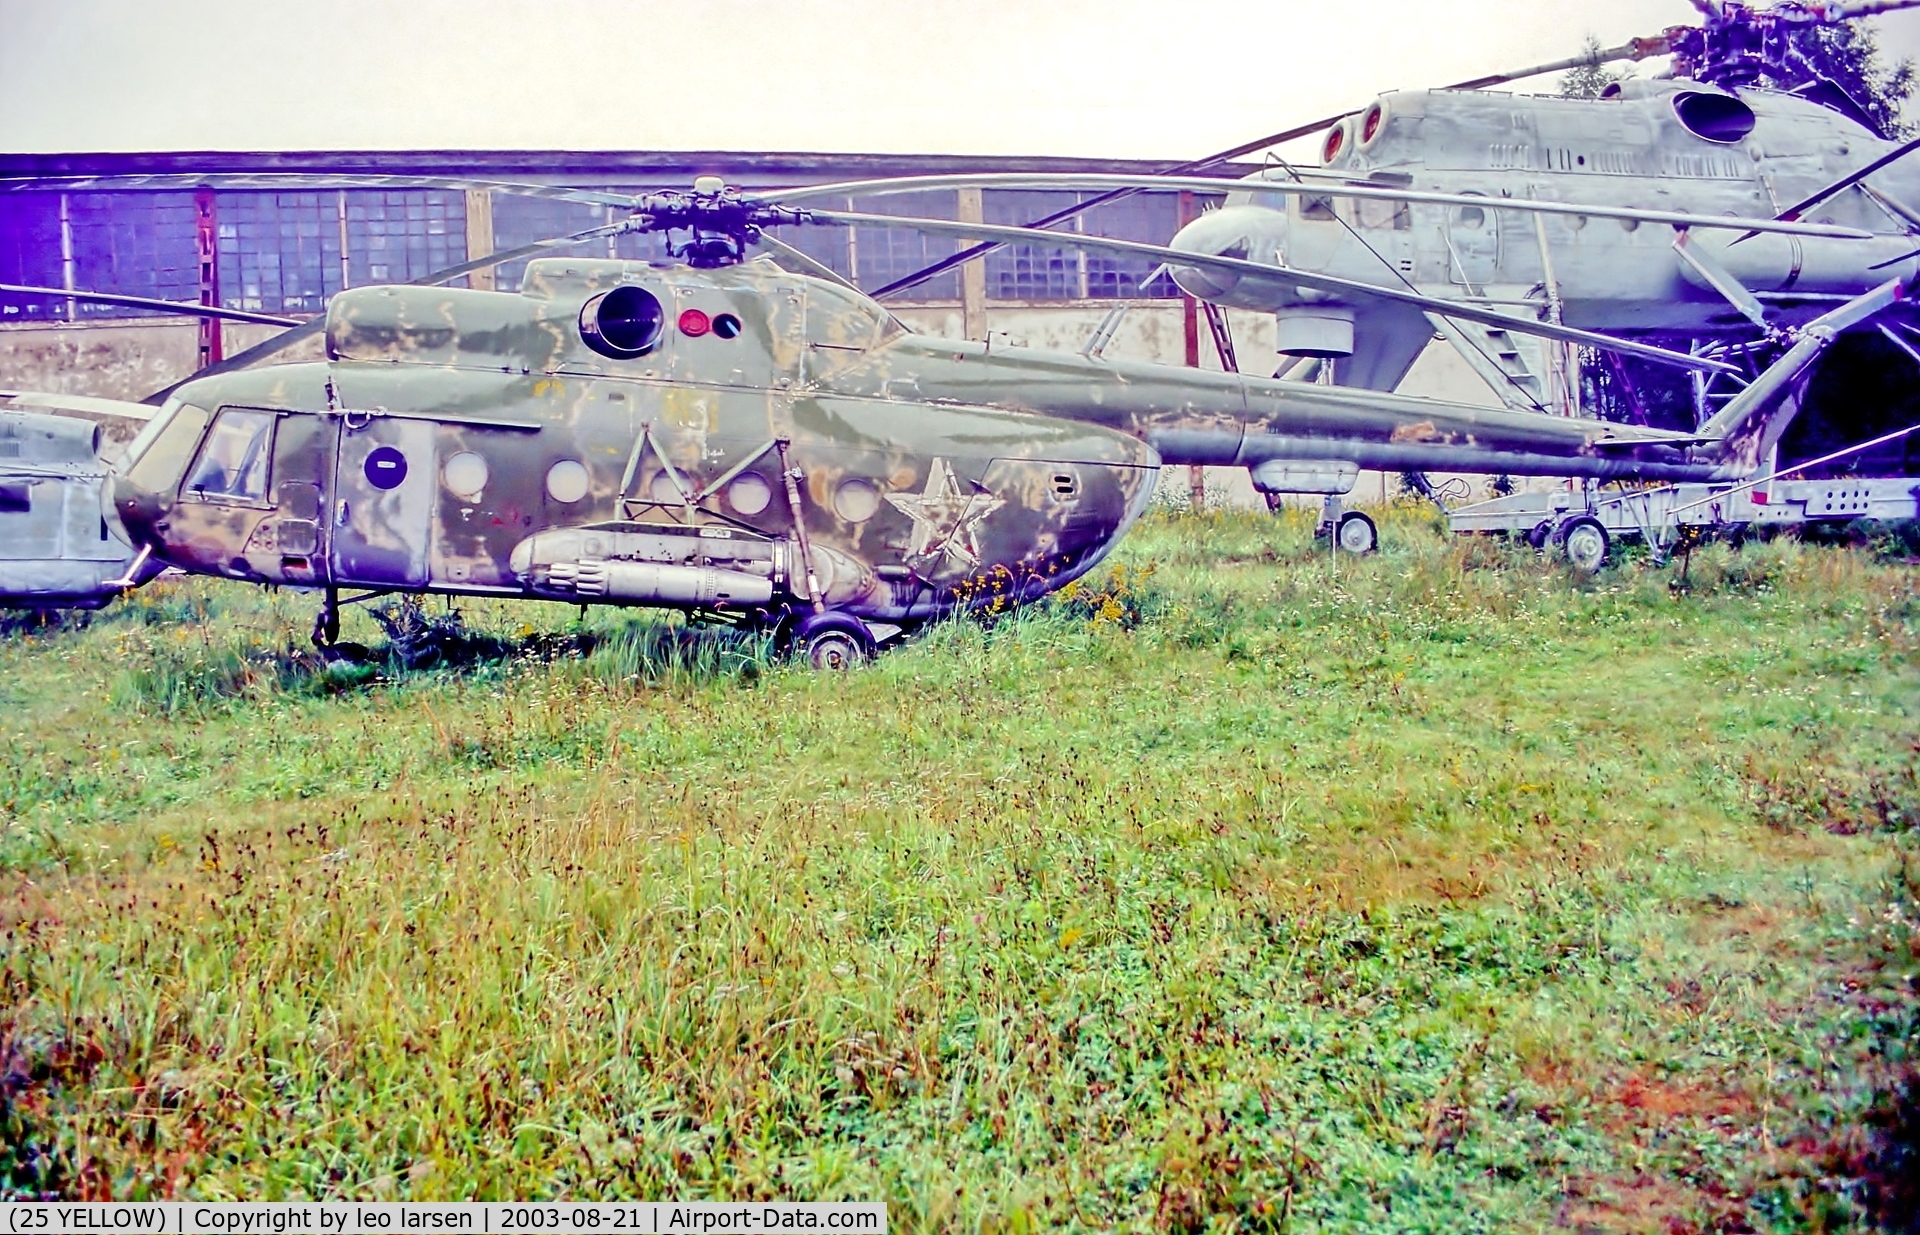 (25 YELLOW), 1974 Mil Mi-8T C/N 9743470, Monino Moscow 21.8.03 former tactical code 61 yellow visible under paint